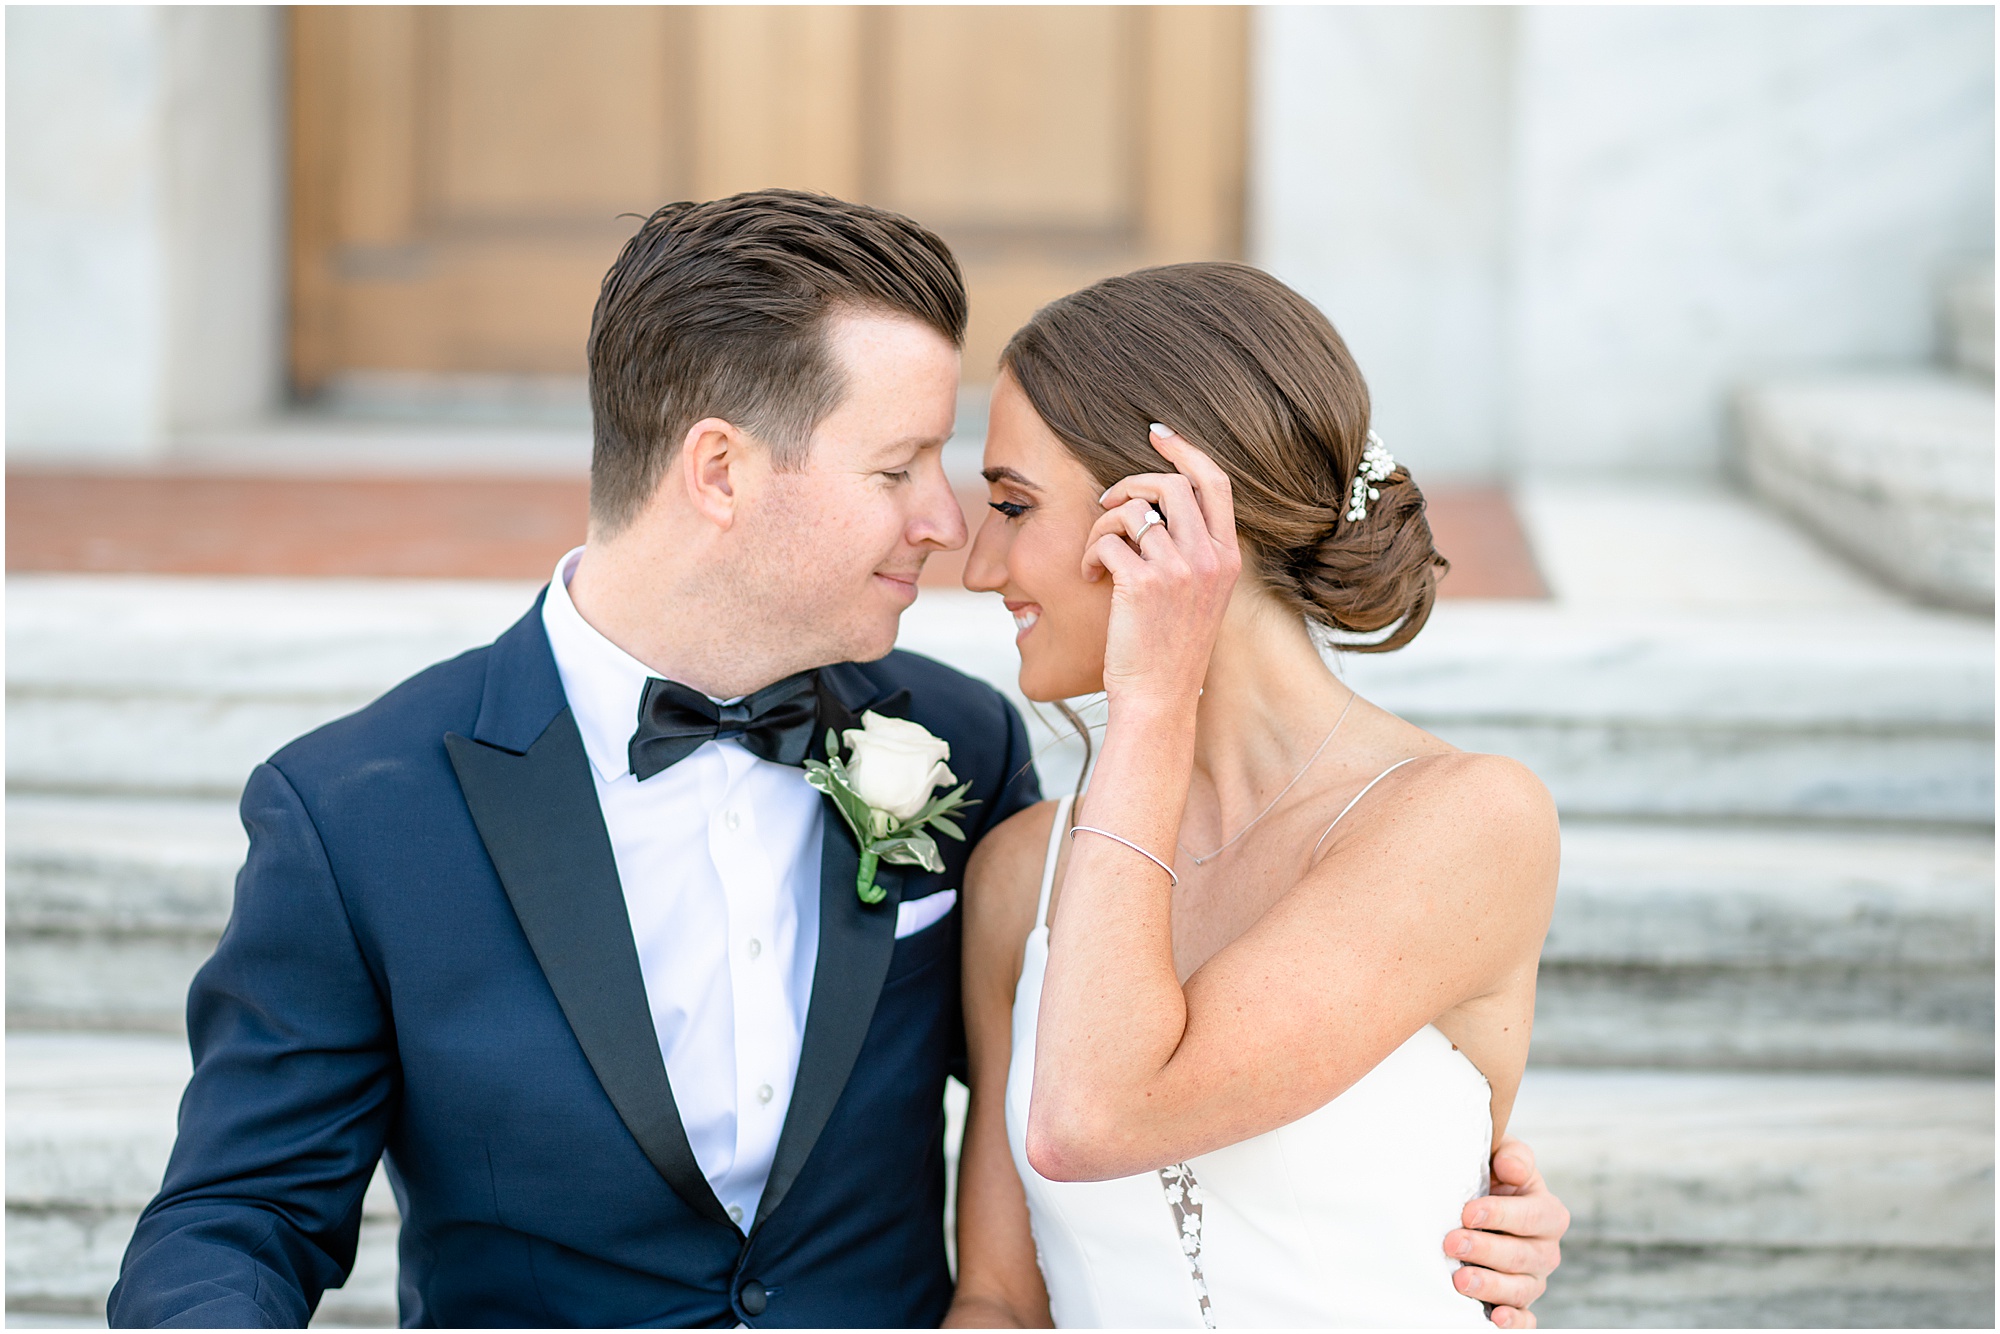 Meghan and Mike take romantic wedding portraits at the DIA for their Detroit wedding at the Eastern.